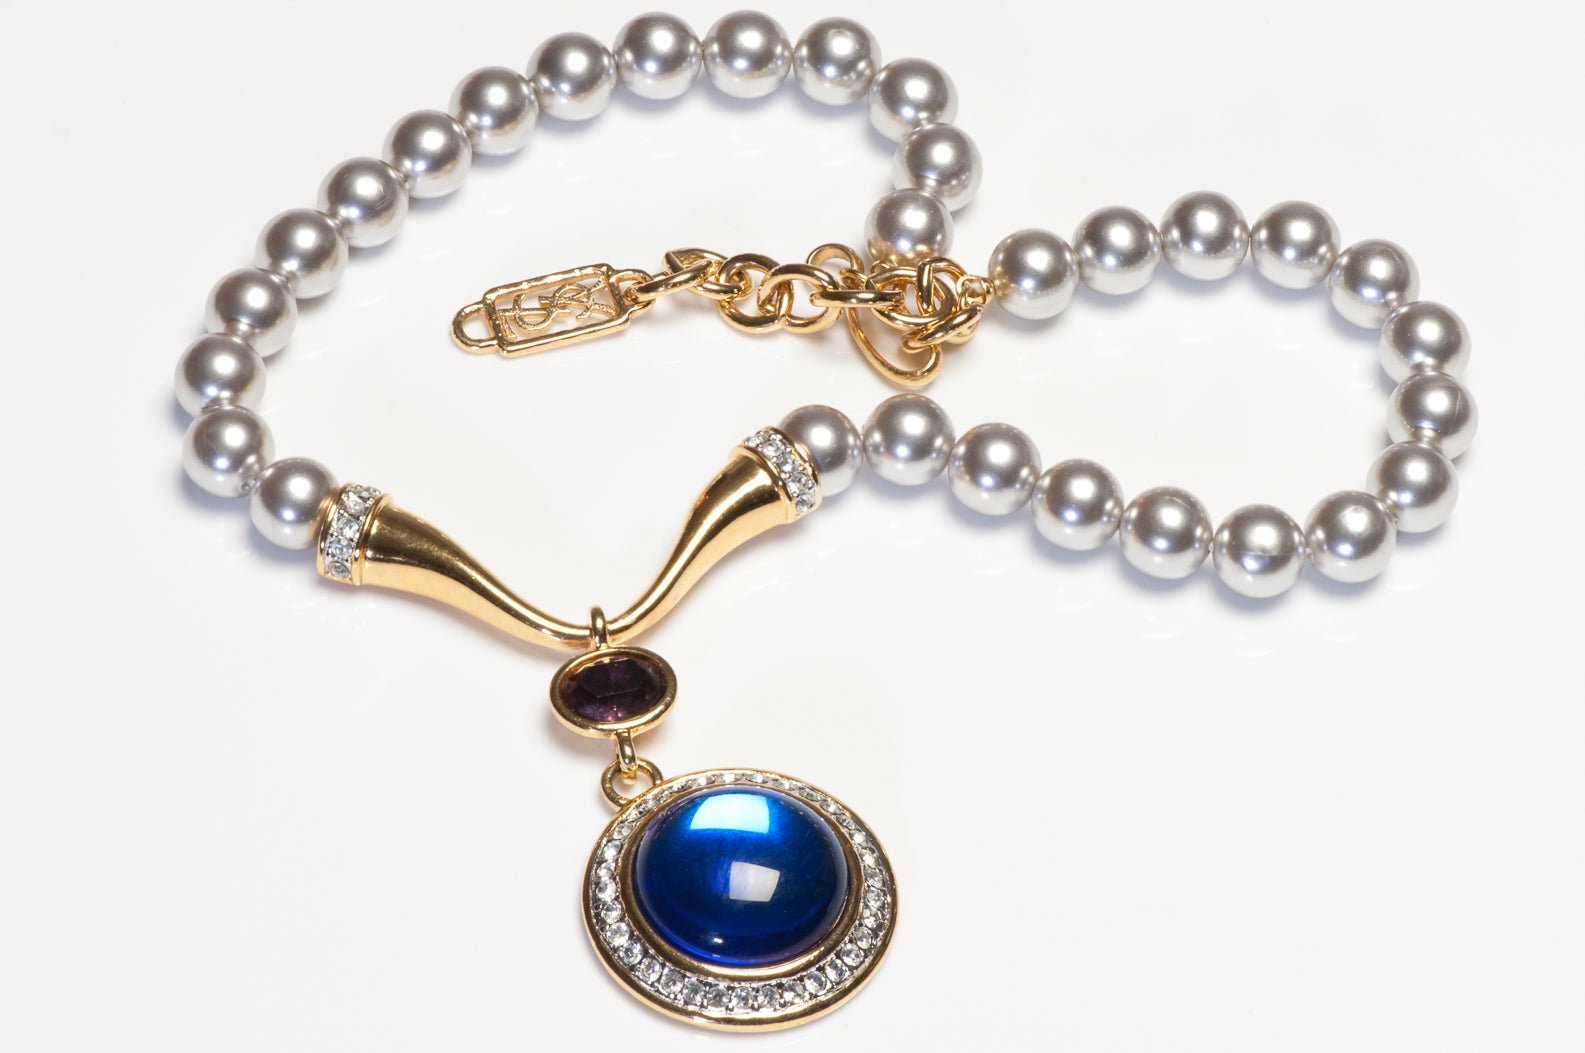 Vintage Yves Saint Laurent YSL Gray Pearls Blue Cabochon Crystal Necklace